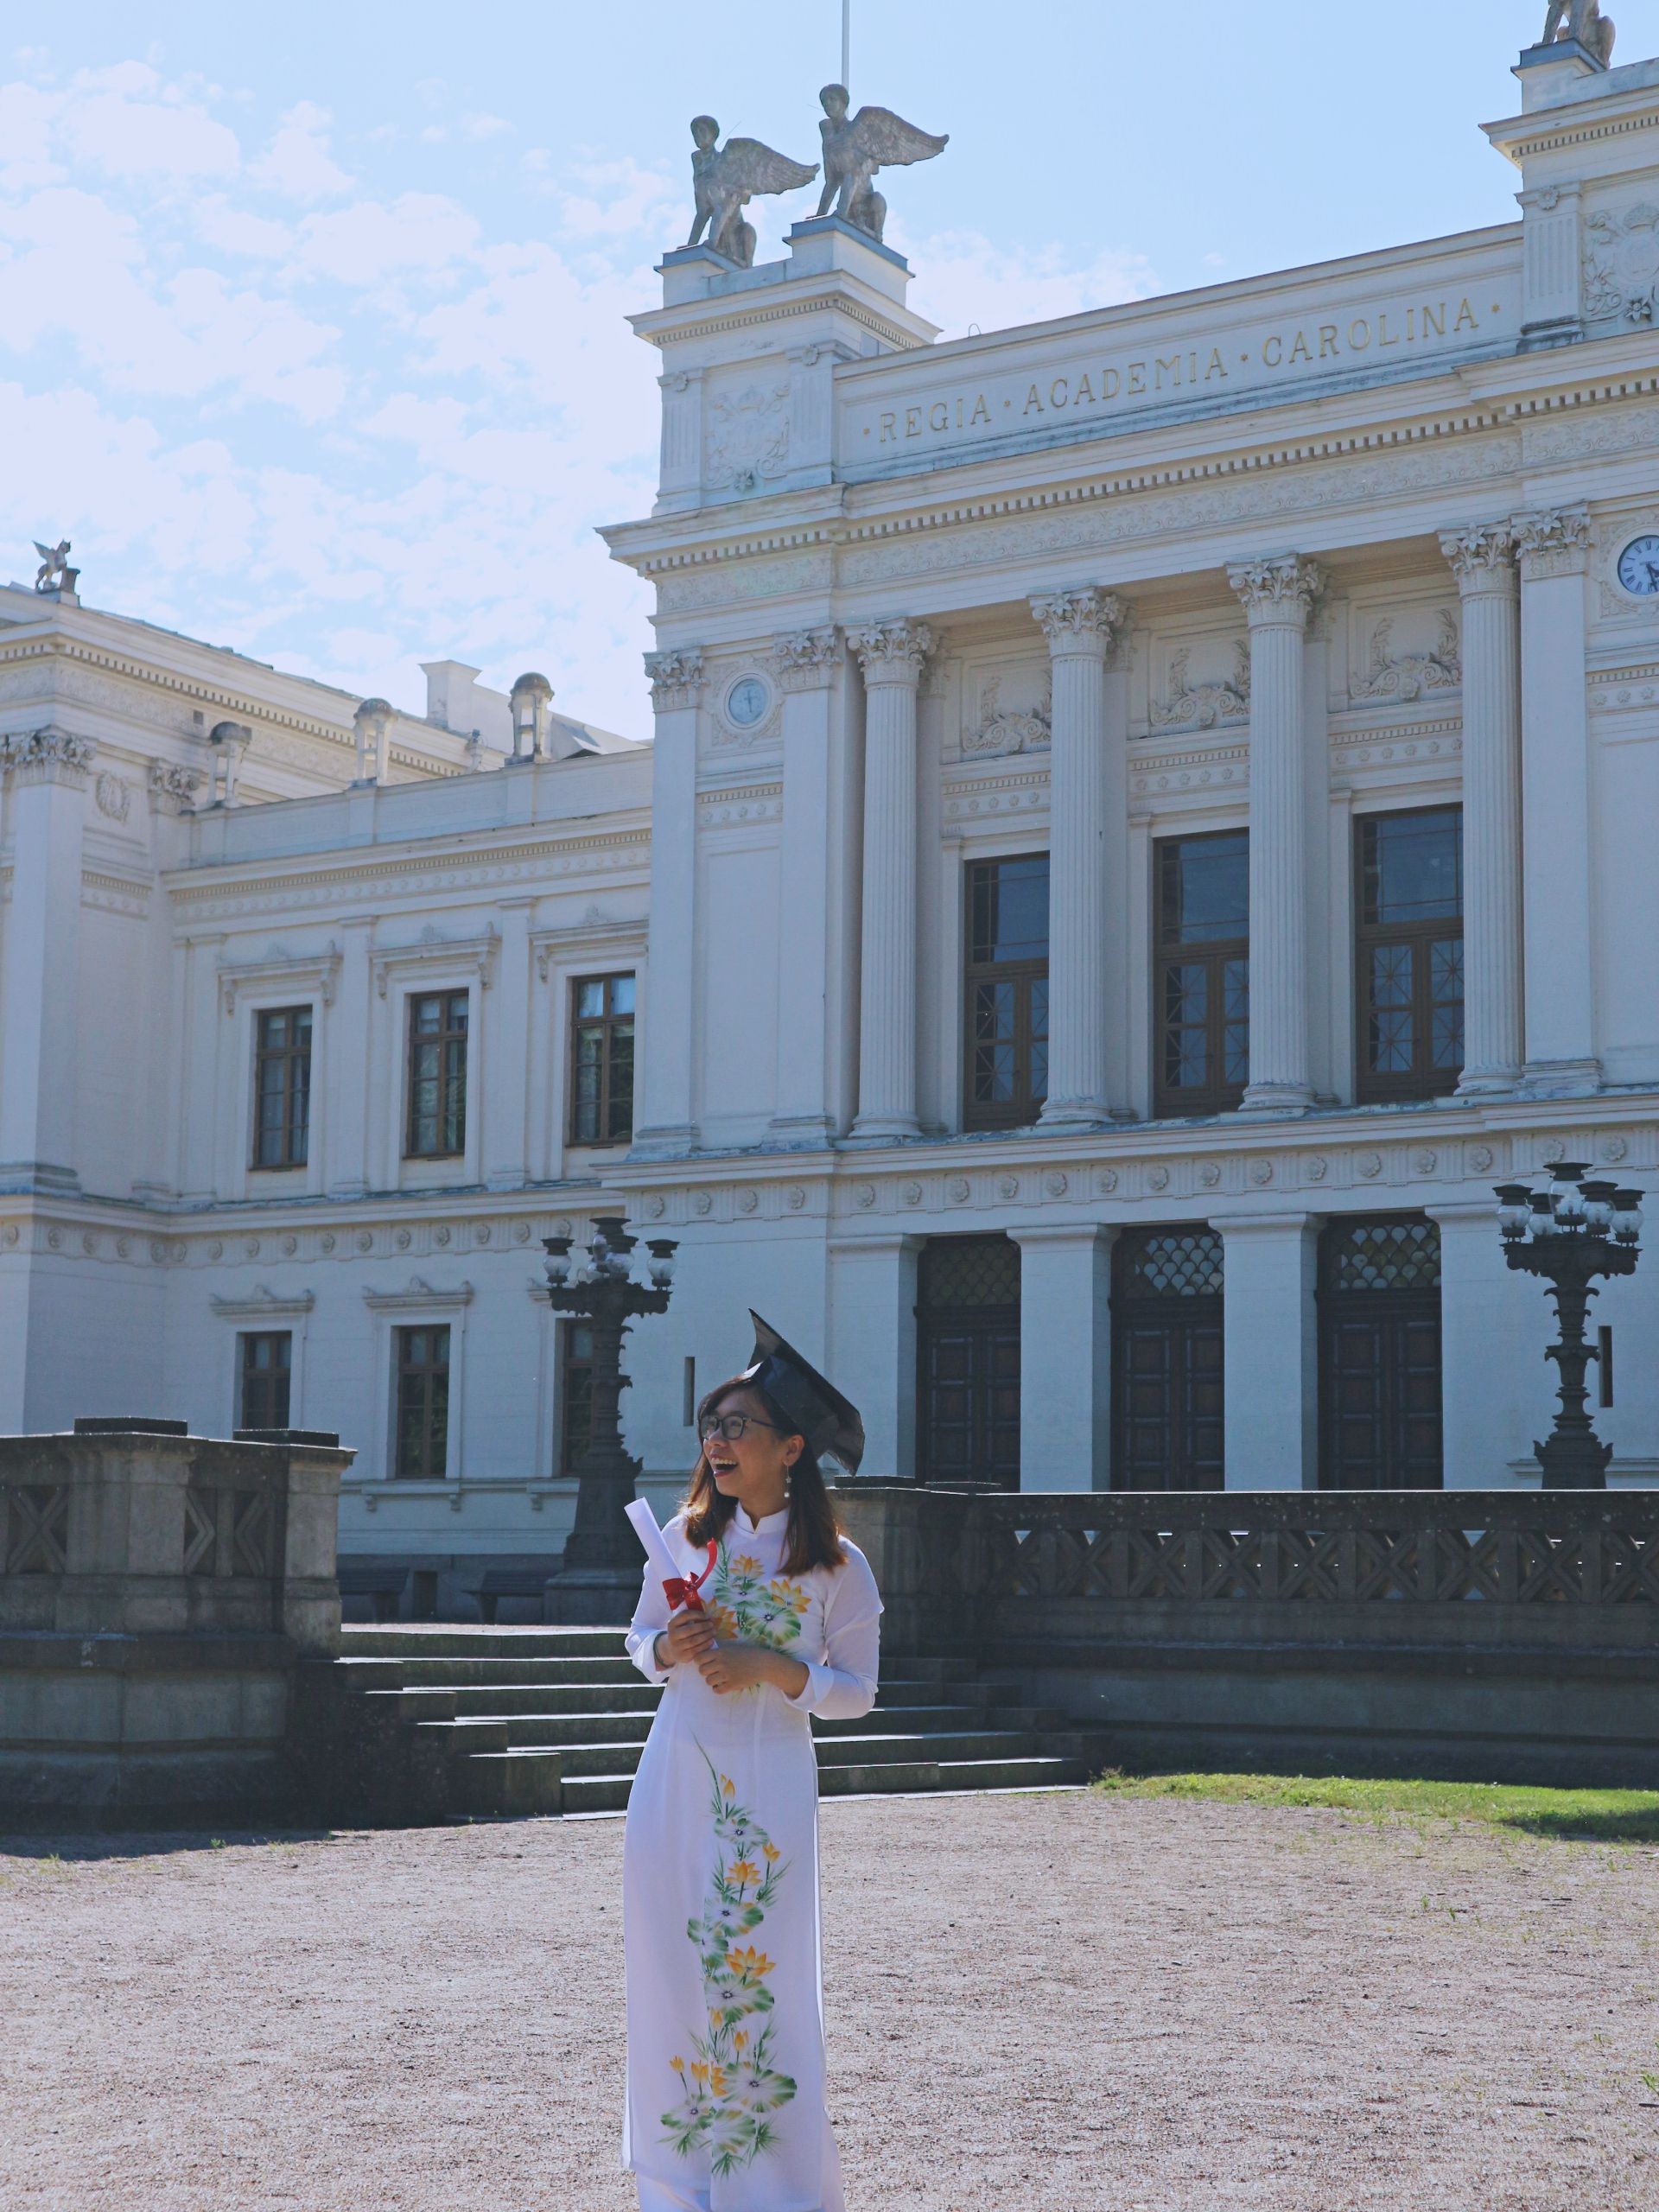 A young girl wearing traditional Vietnamese dress and holding a degree in her hand in front of the Lund University main building